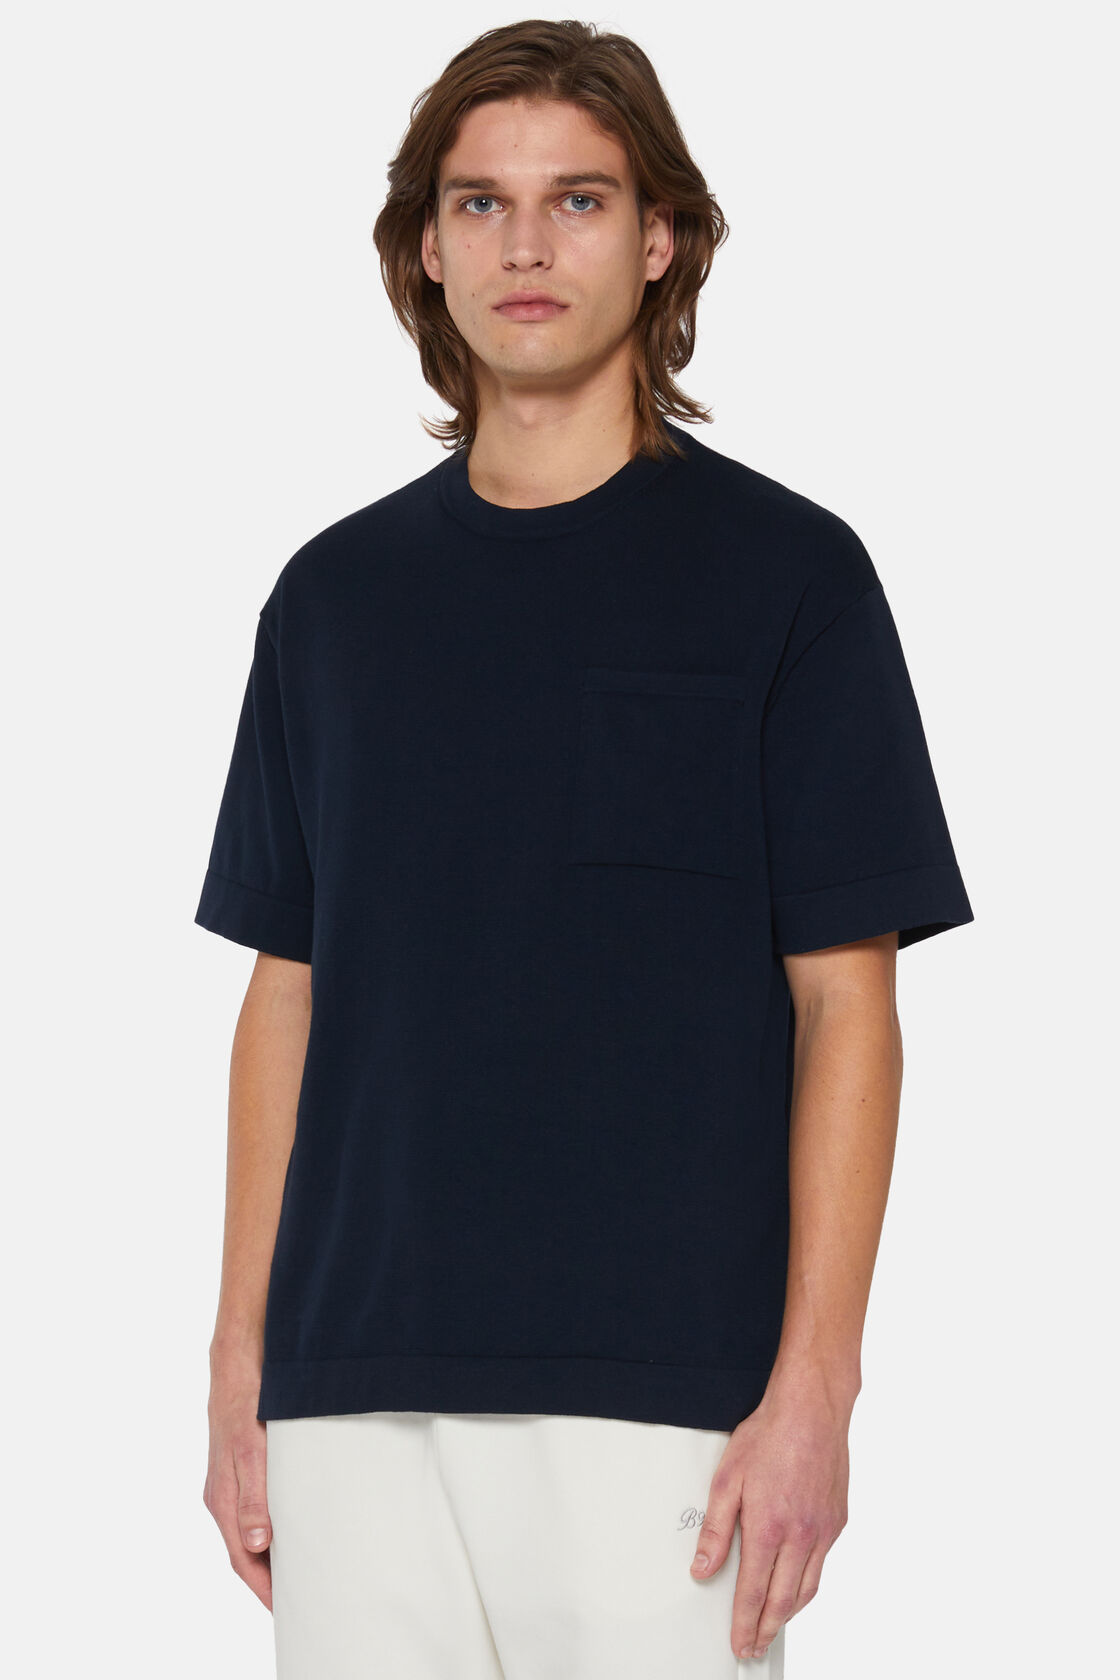 Navy Pima Cotton Knitted T-Shirt, Navy blue, hi-res